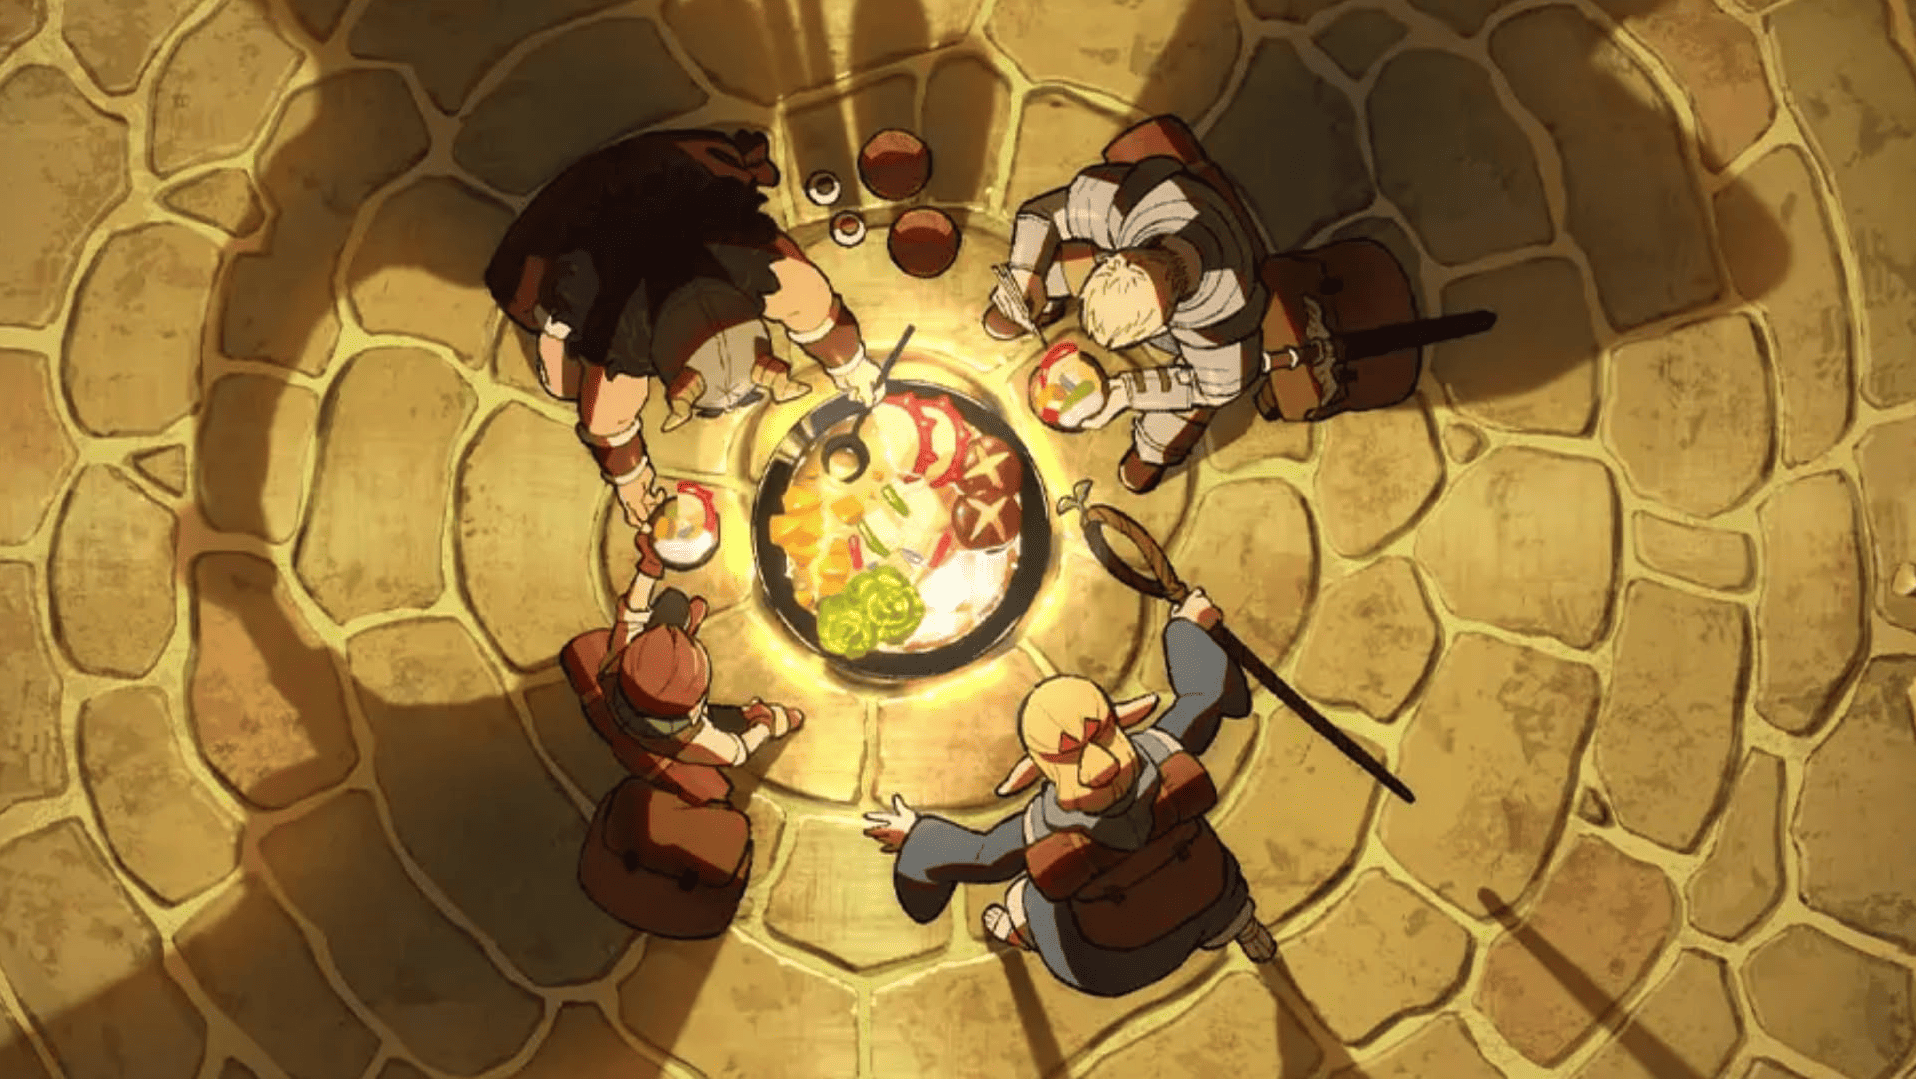 An animated party of adventures eats in a dungeon in this image from Trigger. 